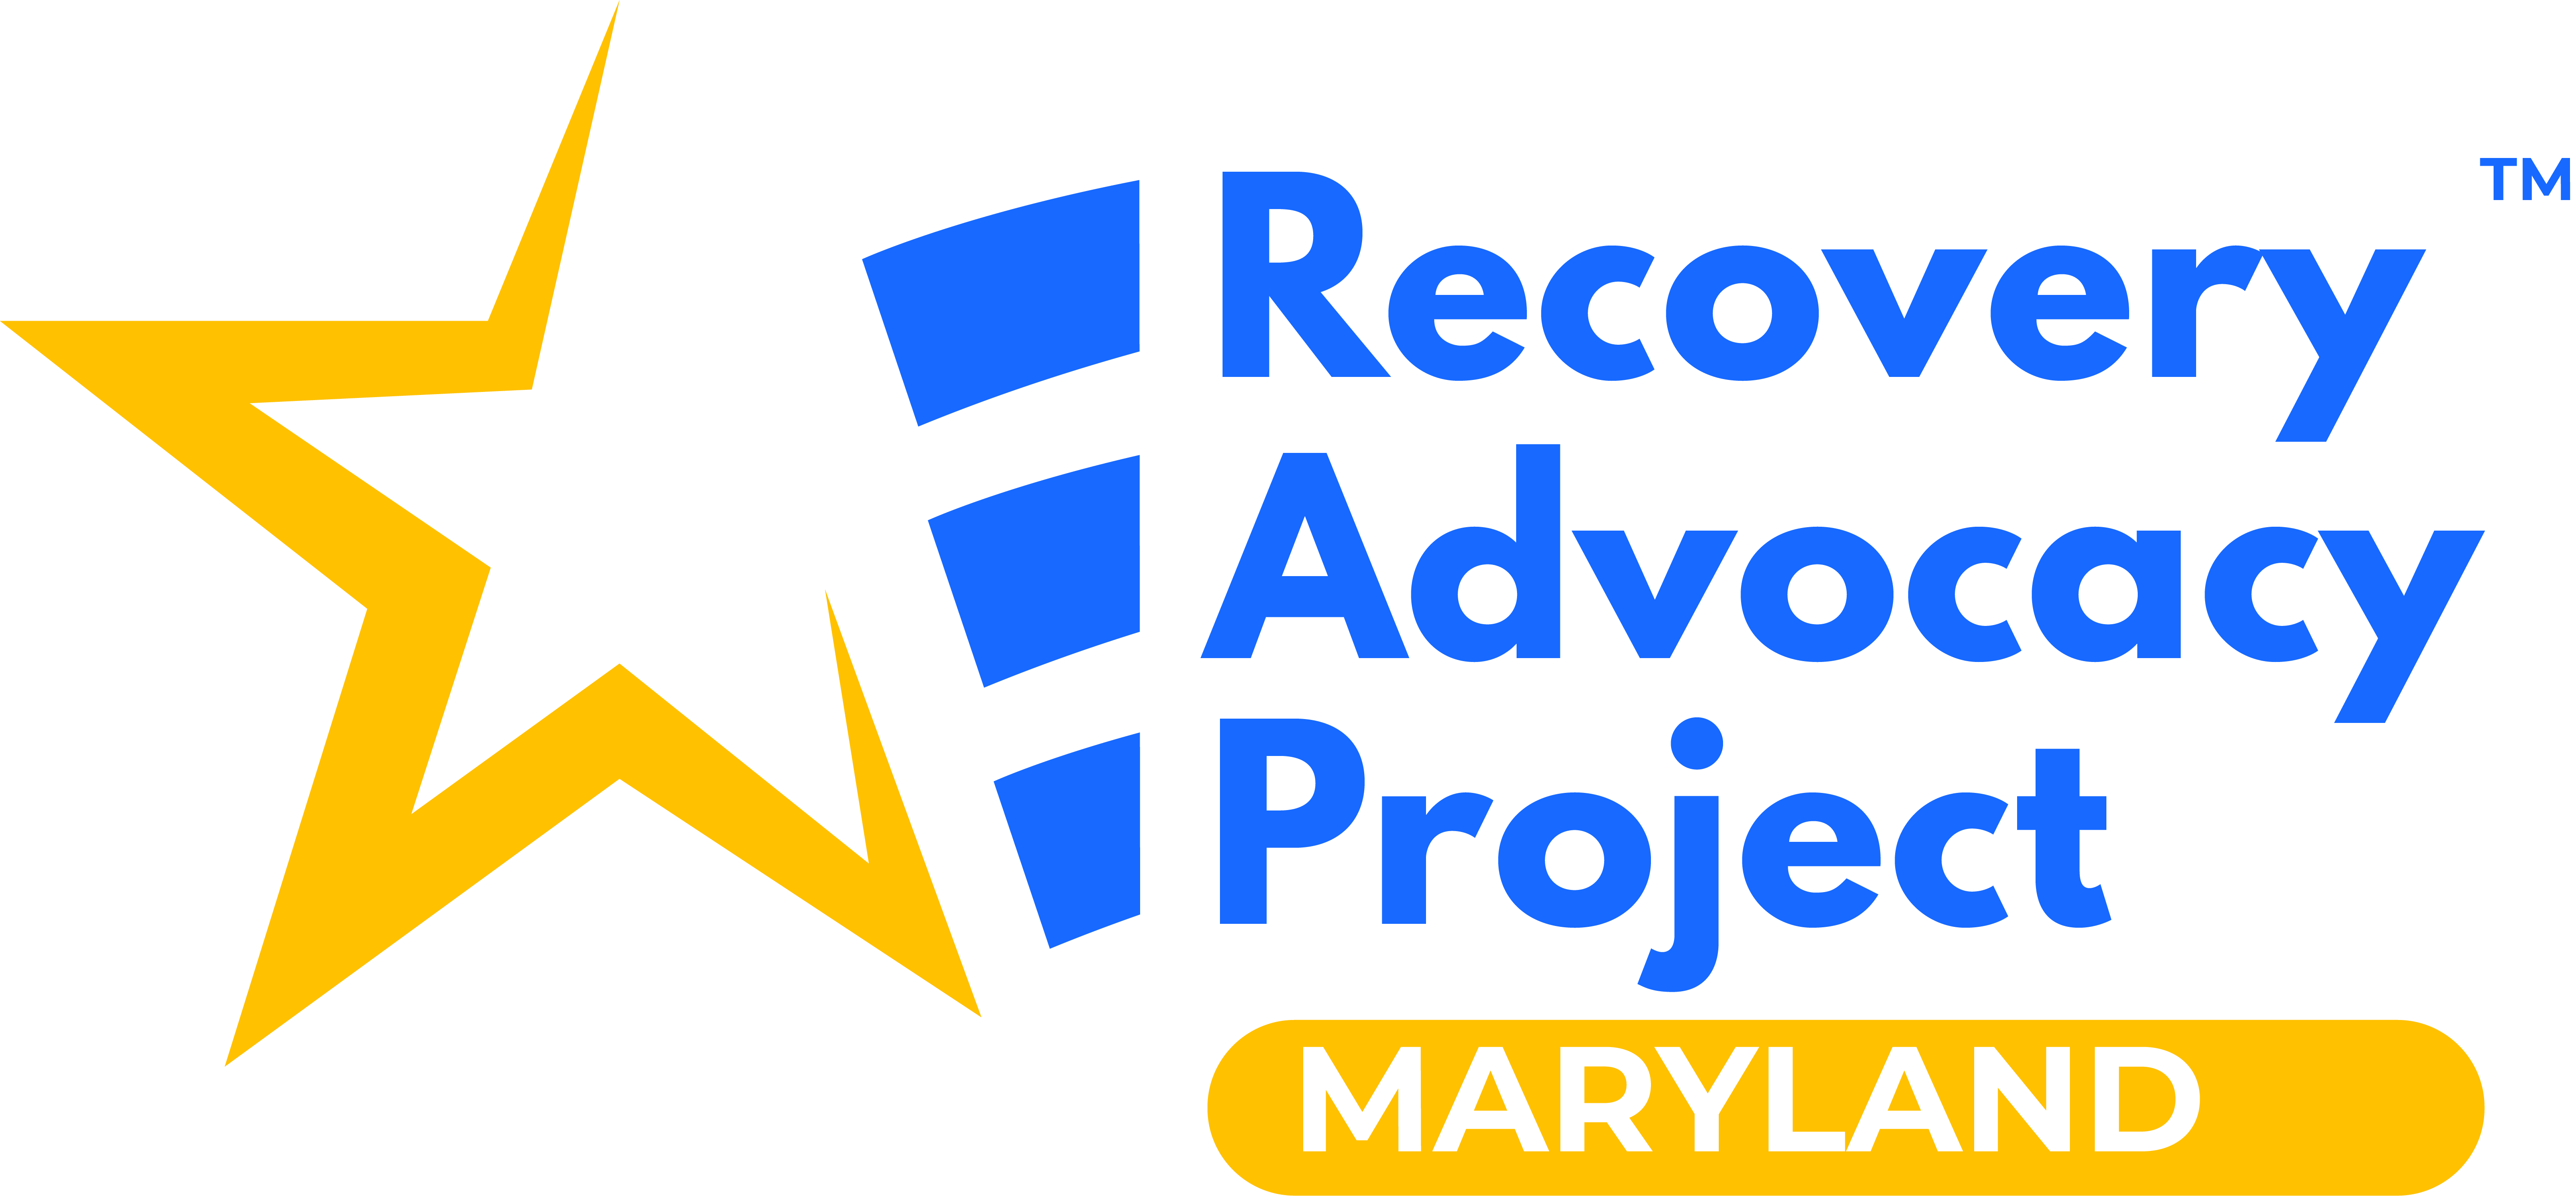 Recovery Advocacy Project Logo for Maryland